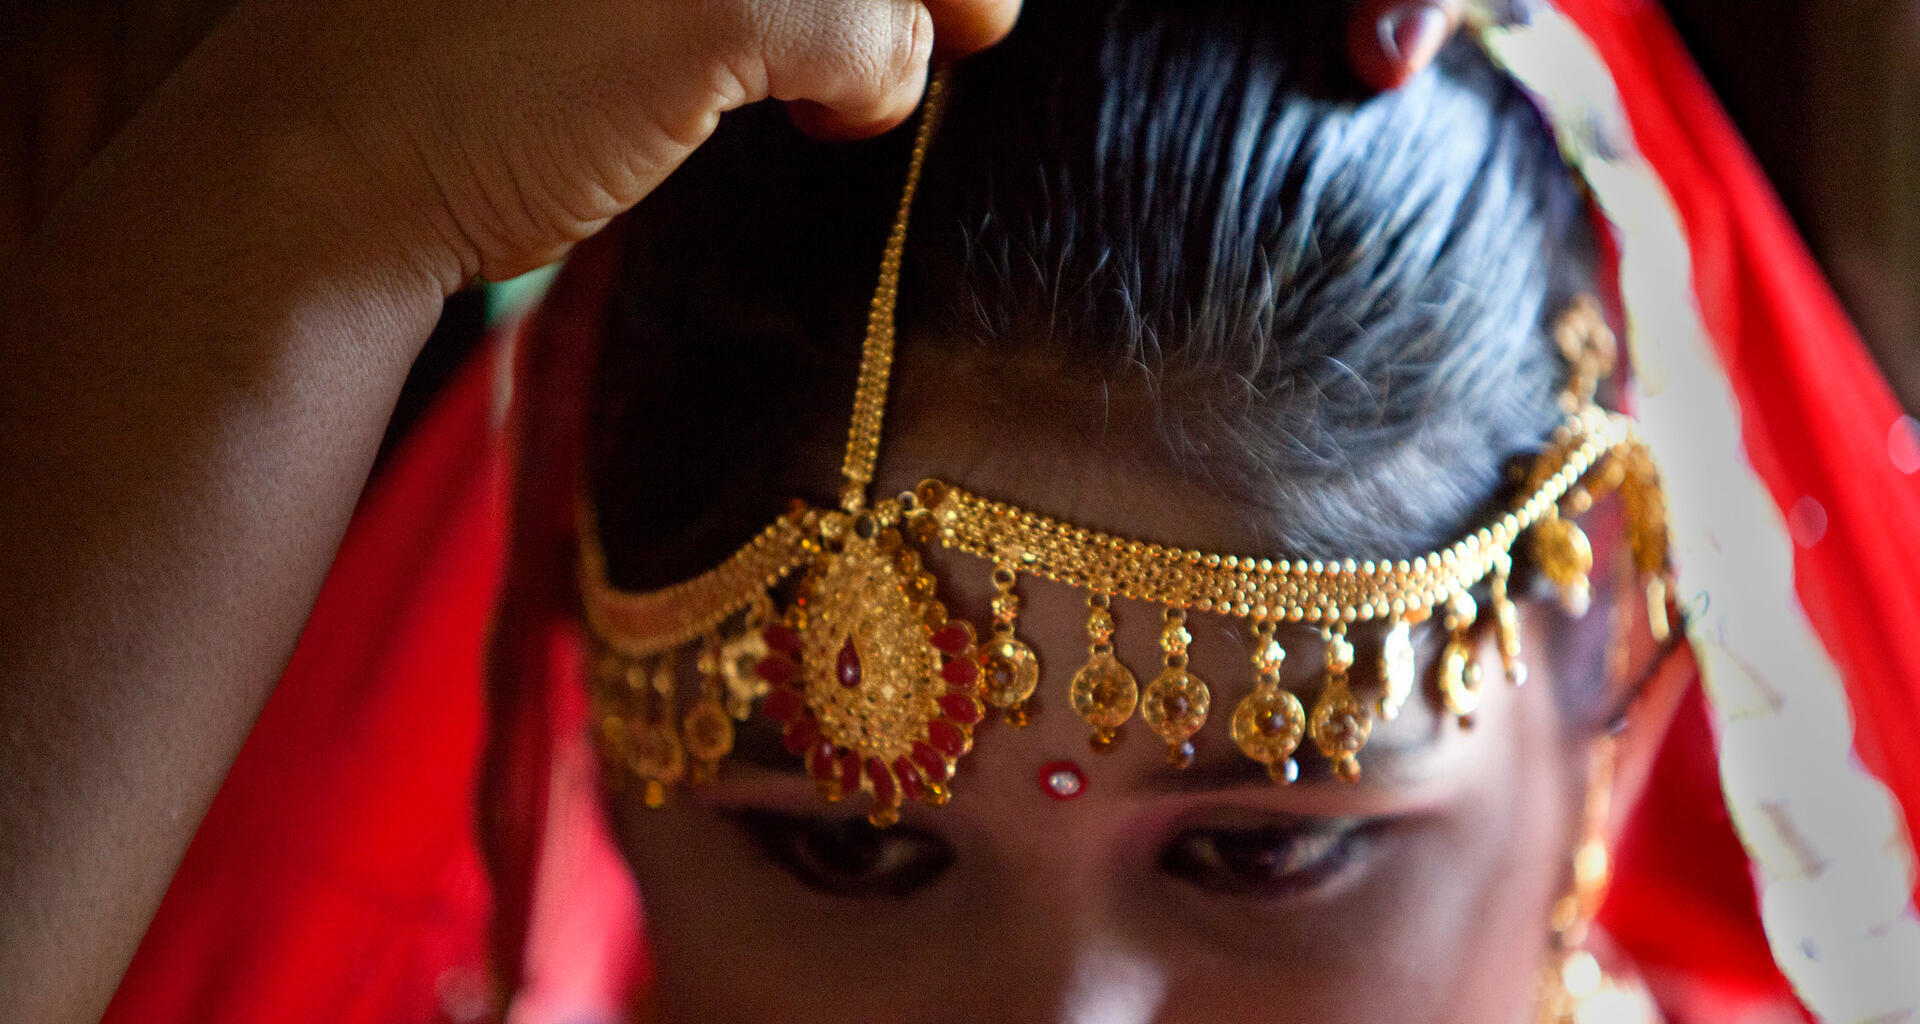 Child marriage picture